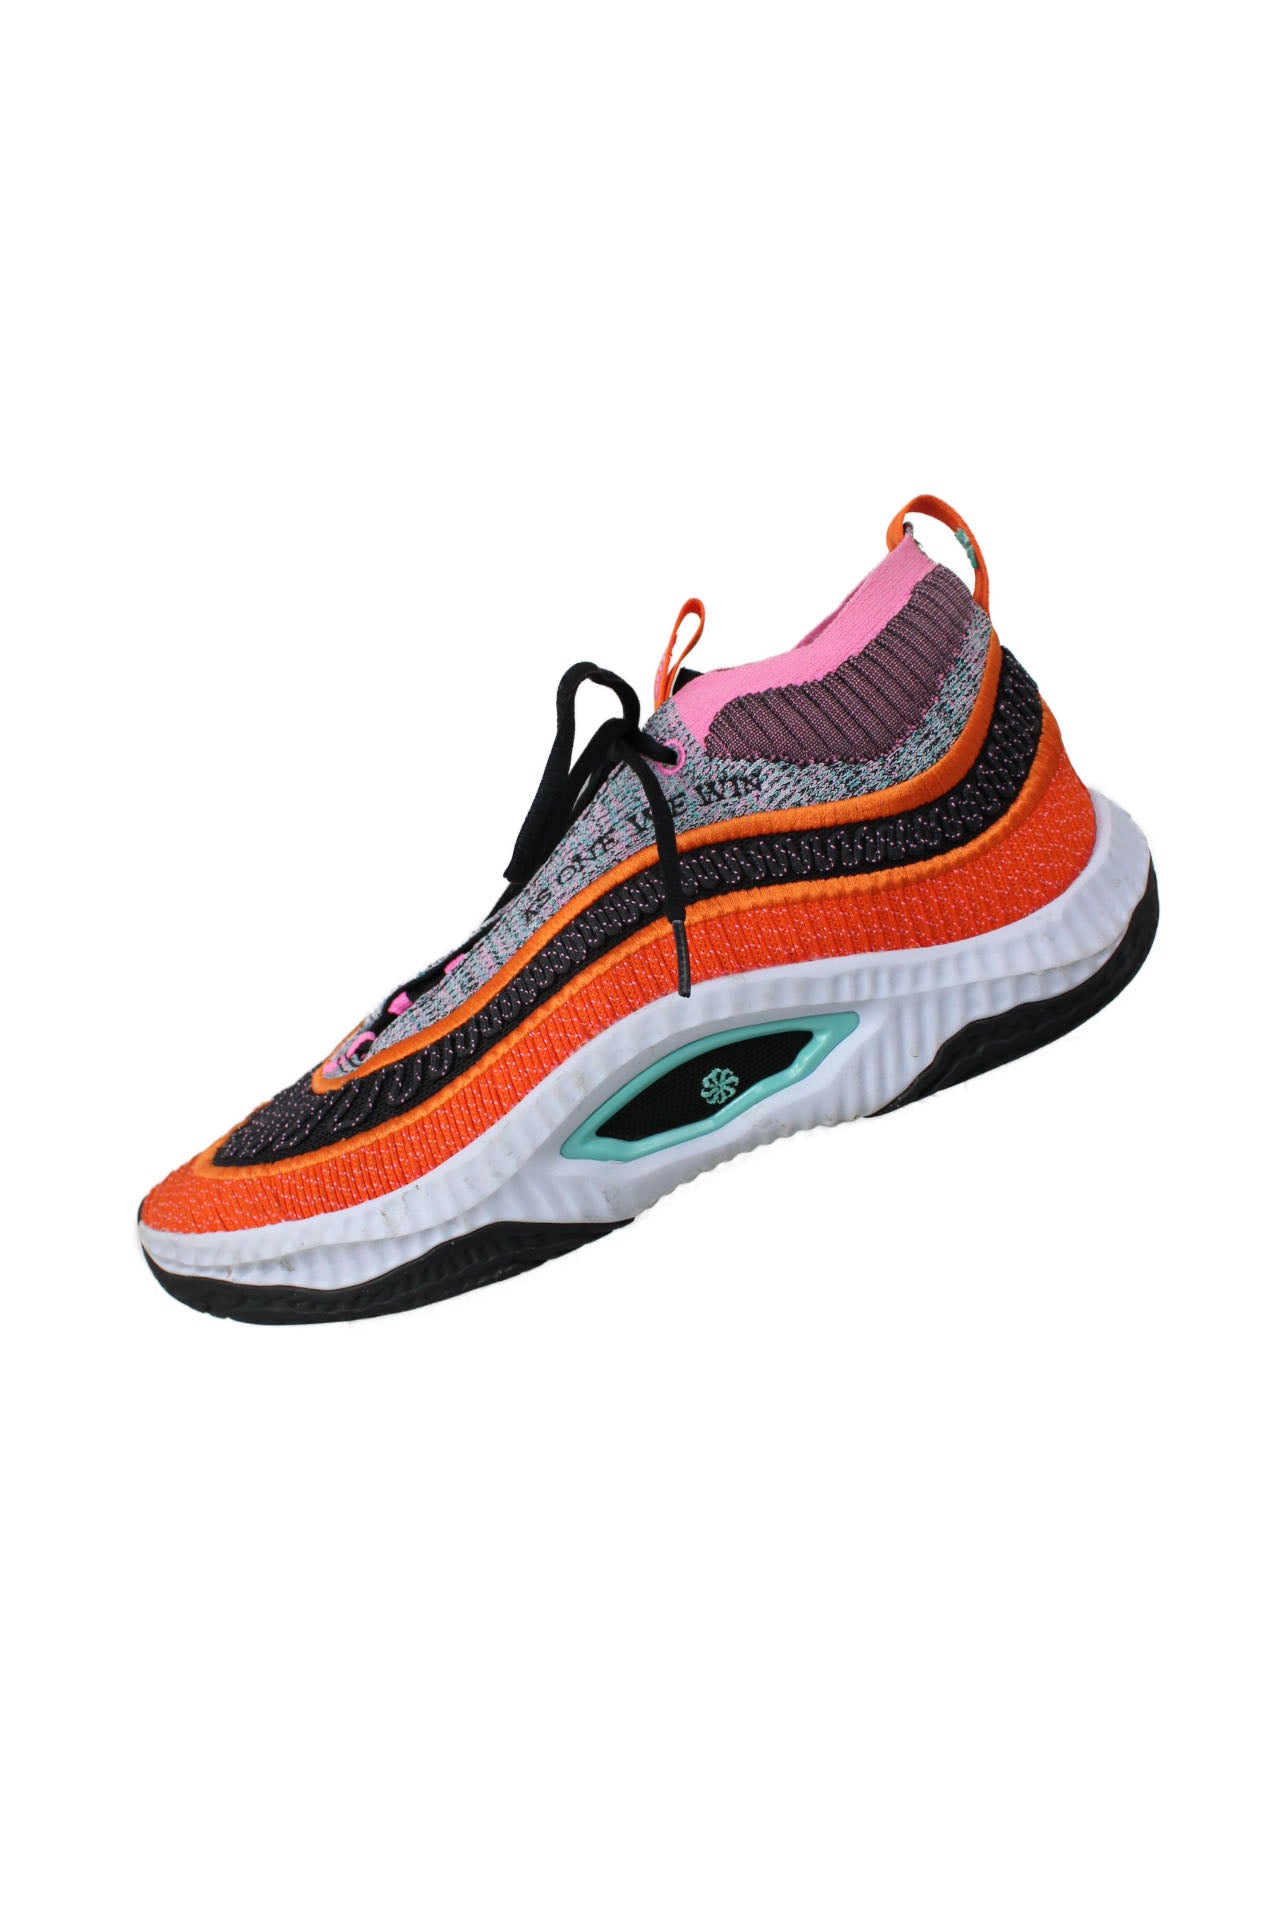 side view of nike red/orange/pink/black/white ‘cosmic unity 3 as one we win’ shoes. features ‘nike’ logo embroidered at tongue, ‘as one we win’ embroidered at sides/heel, and rubber soles.